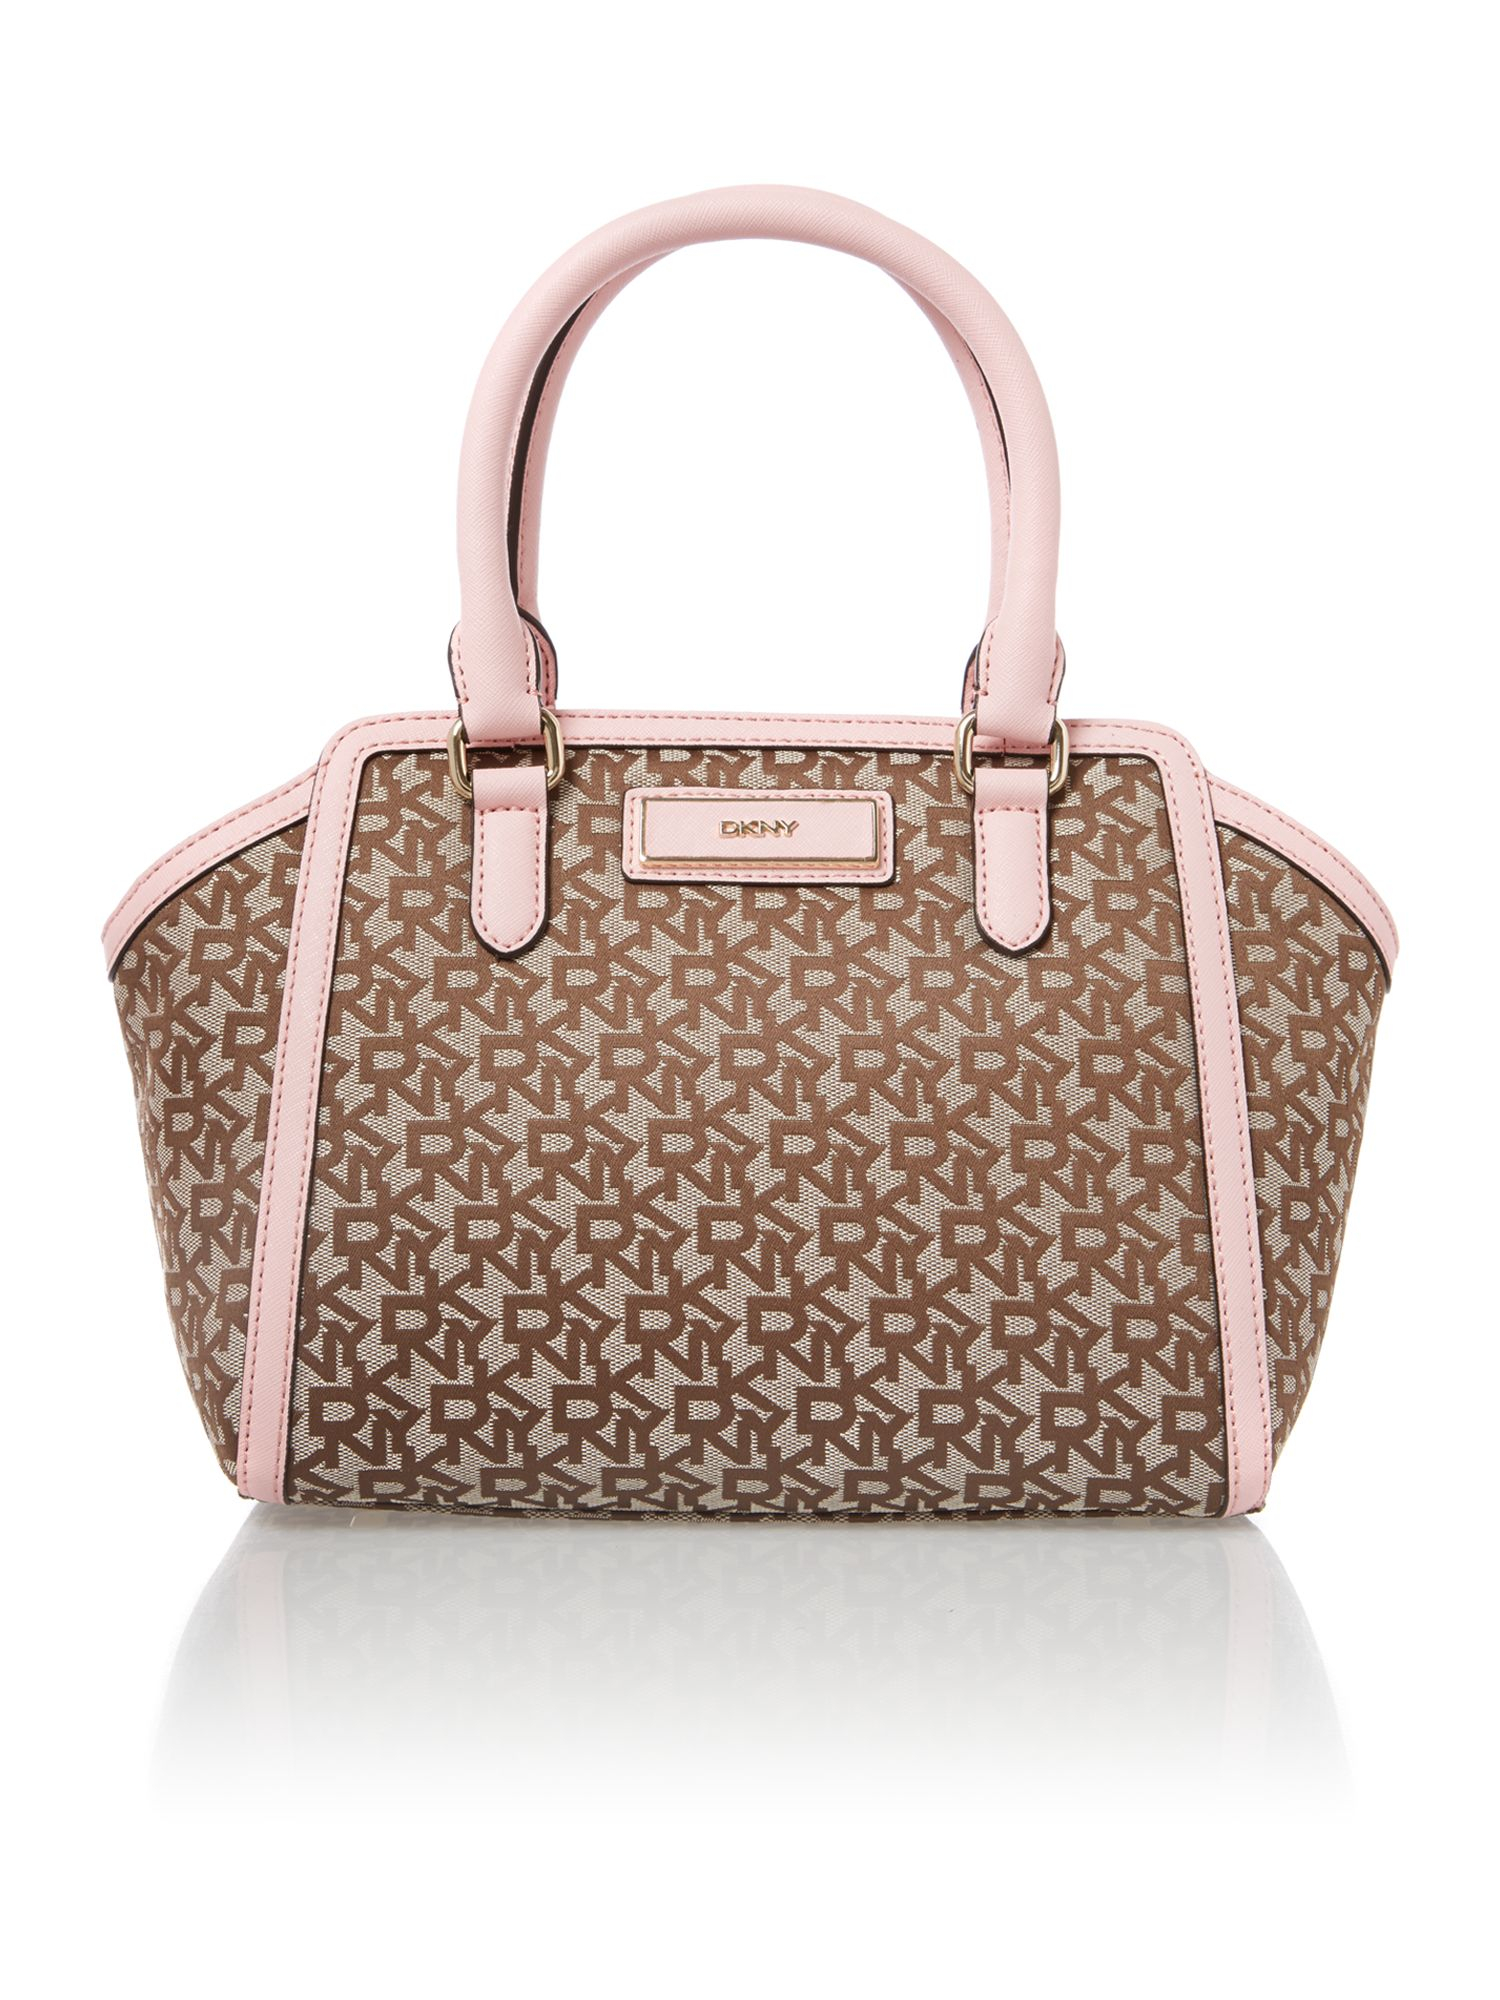 Dkny Saffiano Pink Small Tote Bag in Pink | Lyst